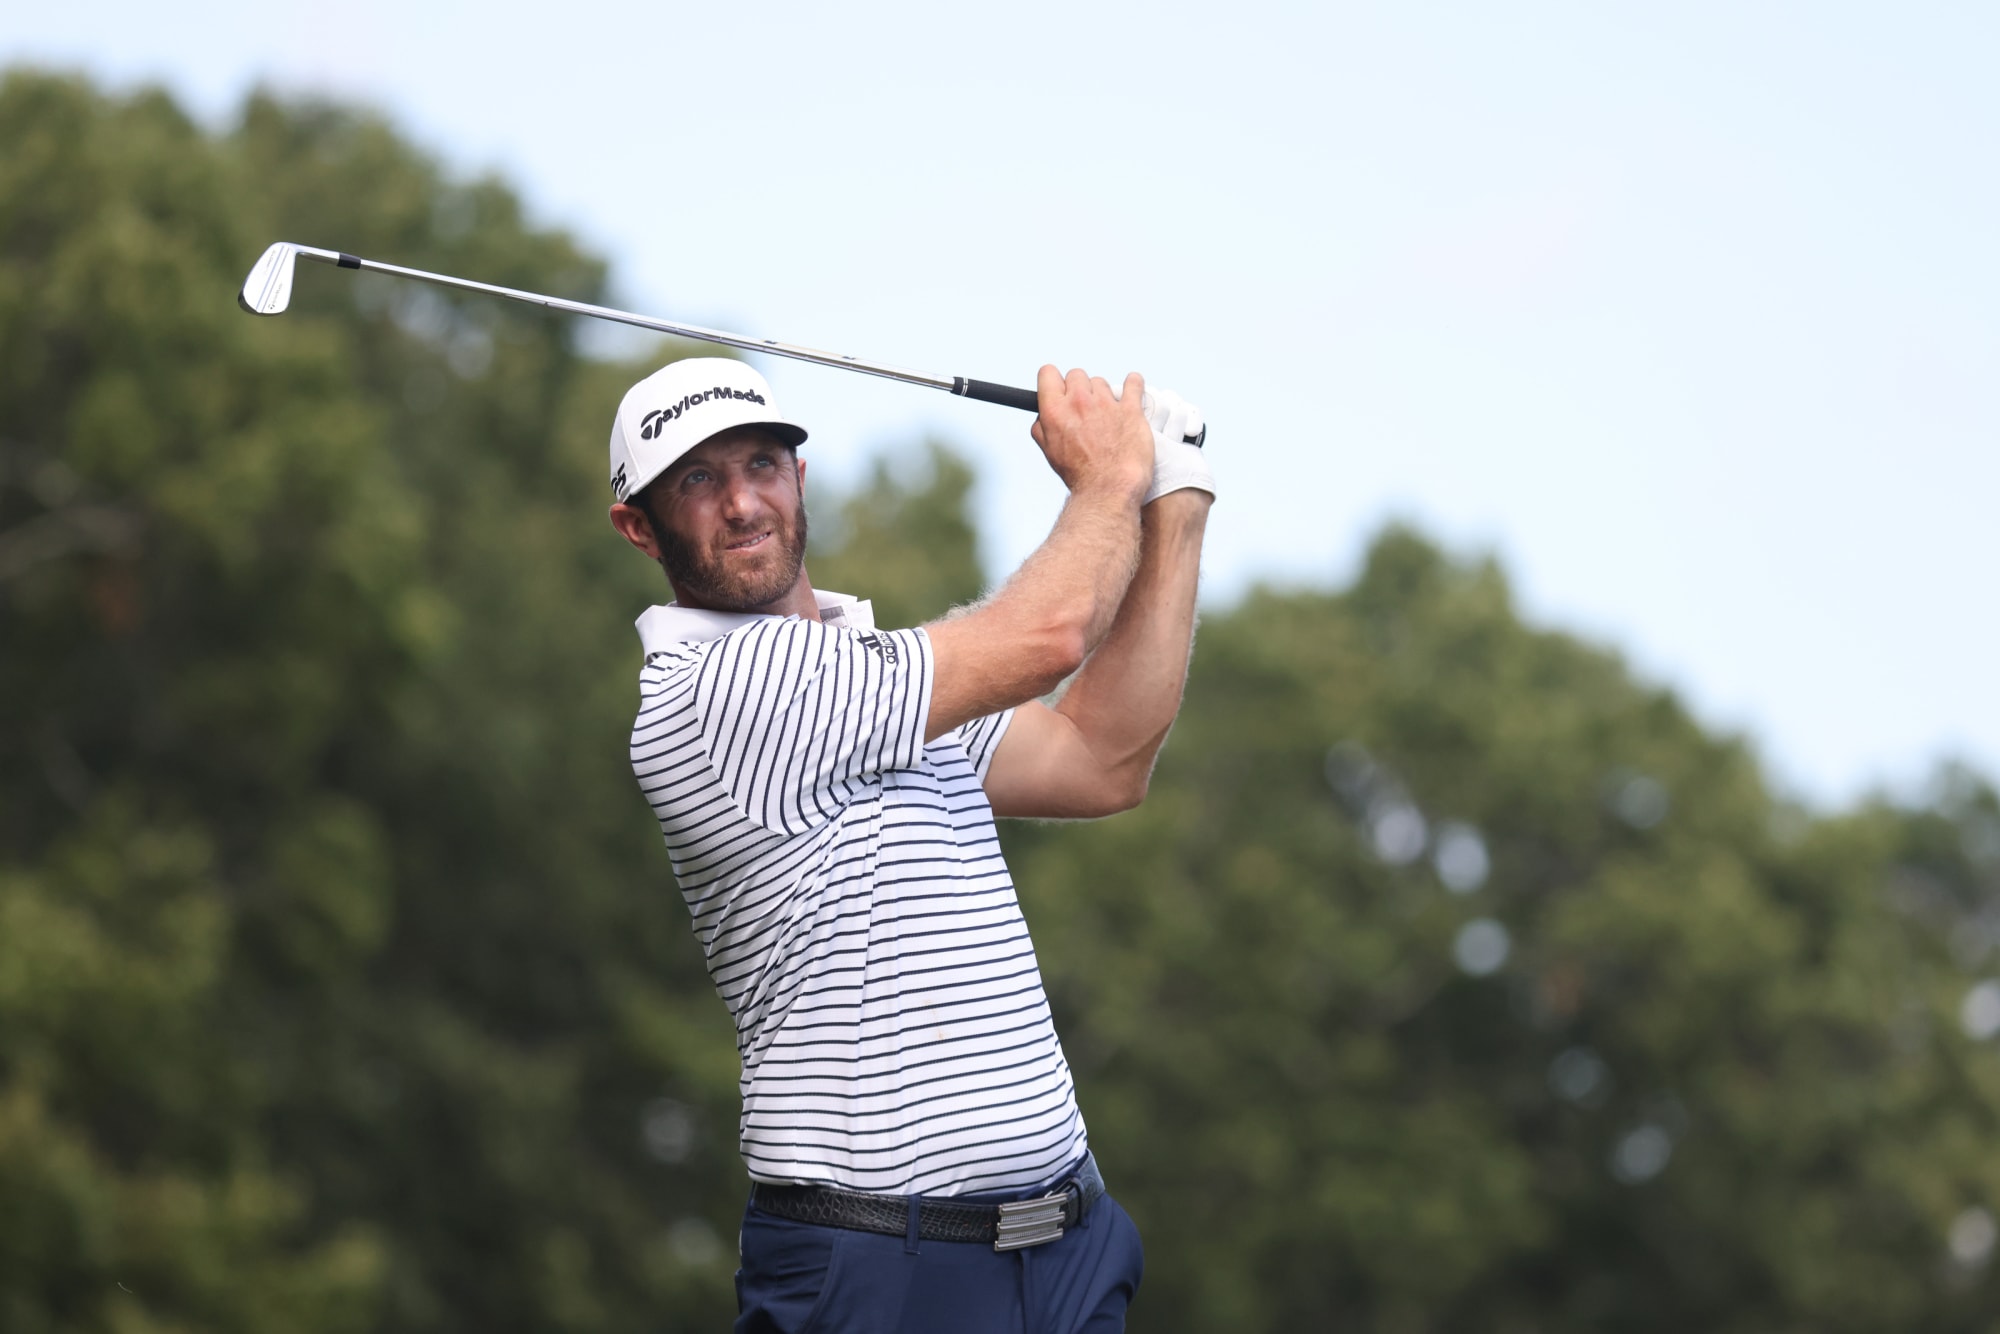 Northern Trust: Dustin Johnson misses chance to shoot 59 or lower